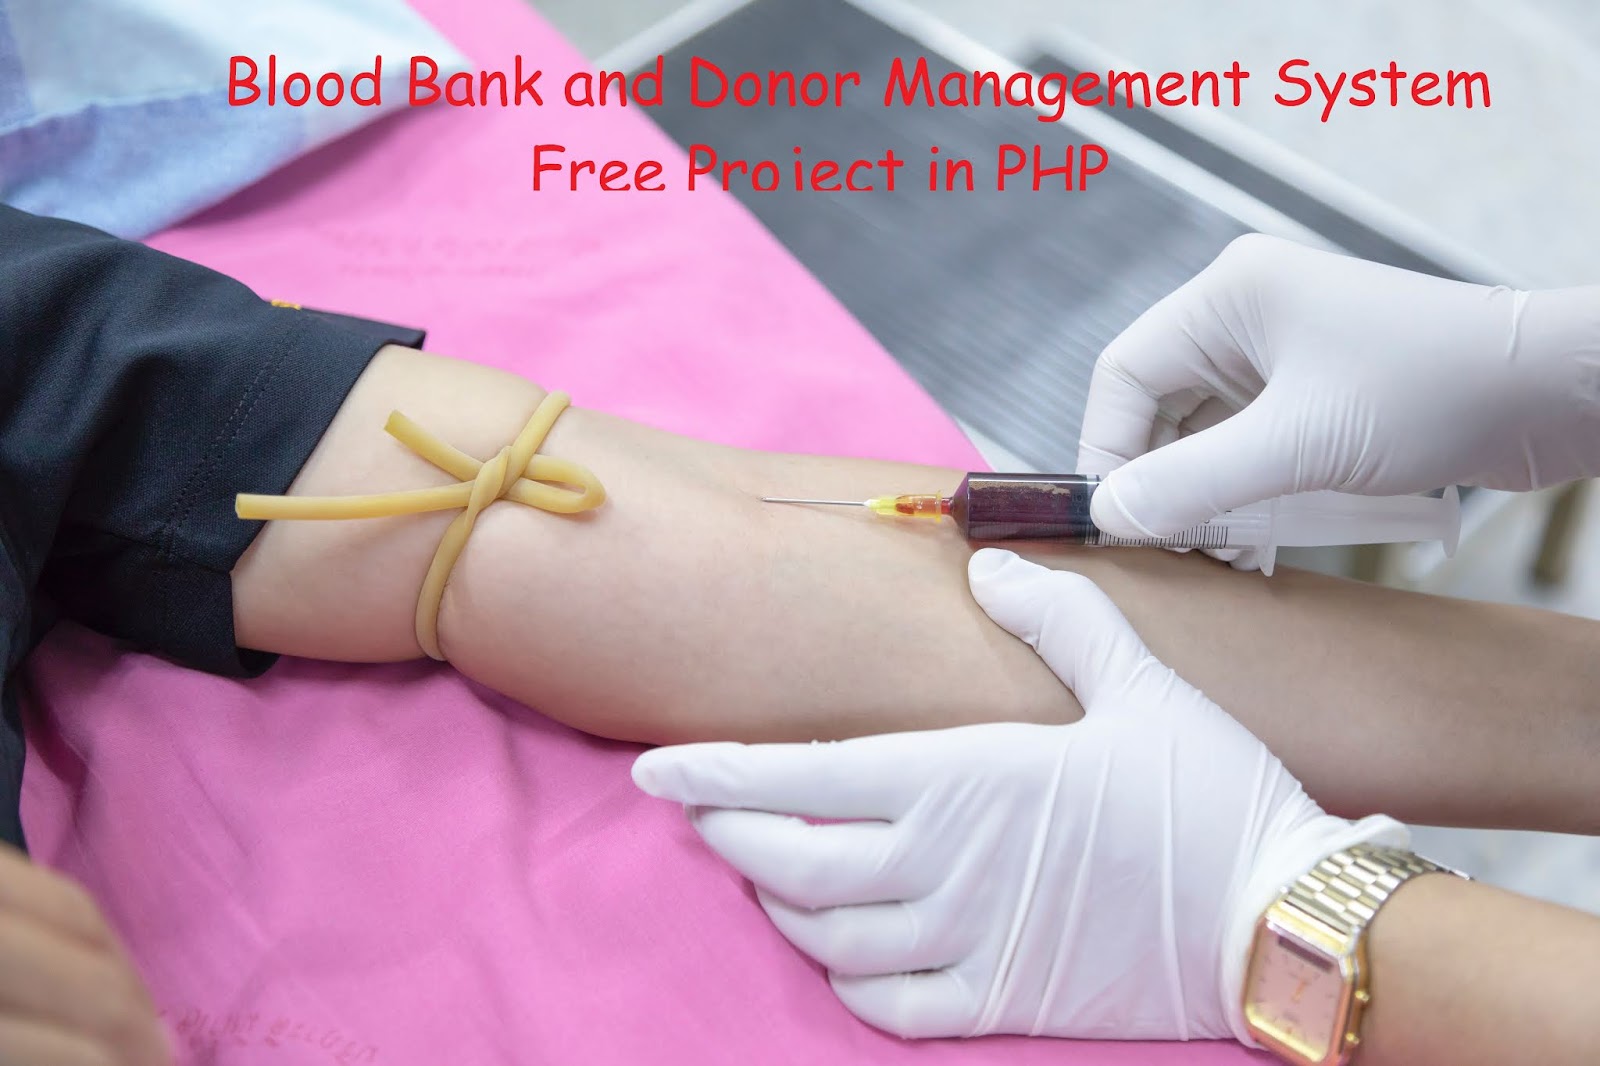 Blood Bank and Donor Management System - Free Project in PHP